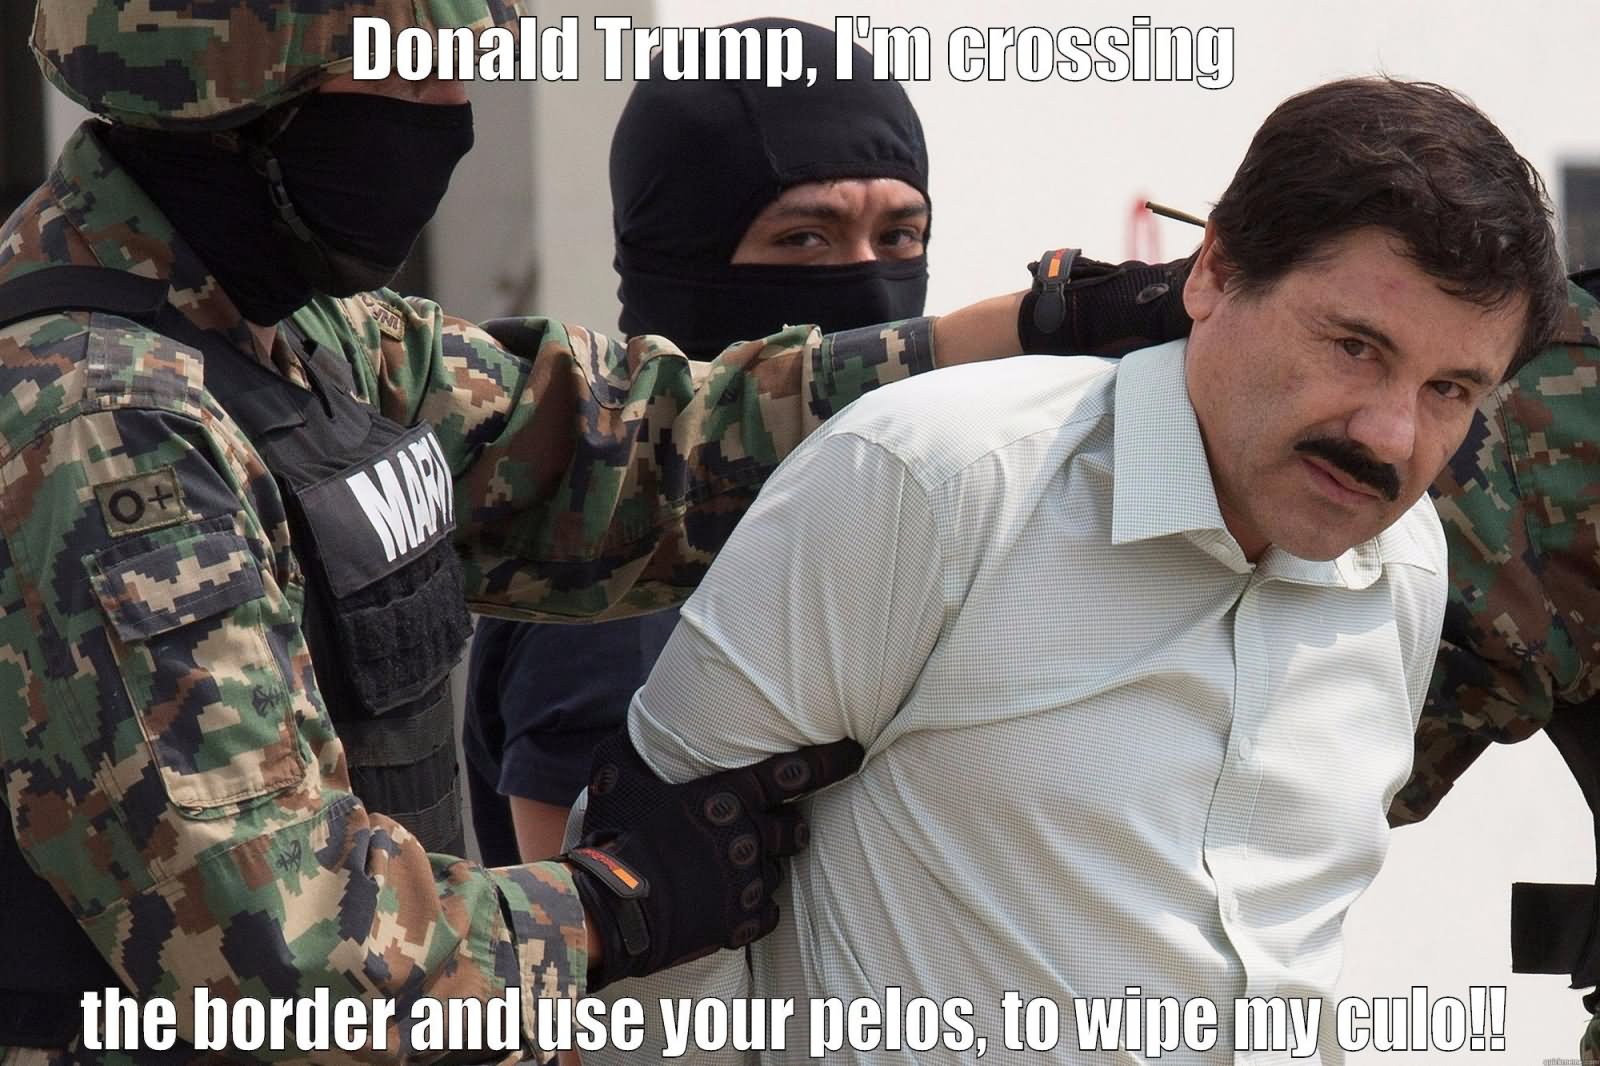 Donald Trump I Am Crossing The Border And Use Your Pelos To Wipe My Culo Funny Meme Picture